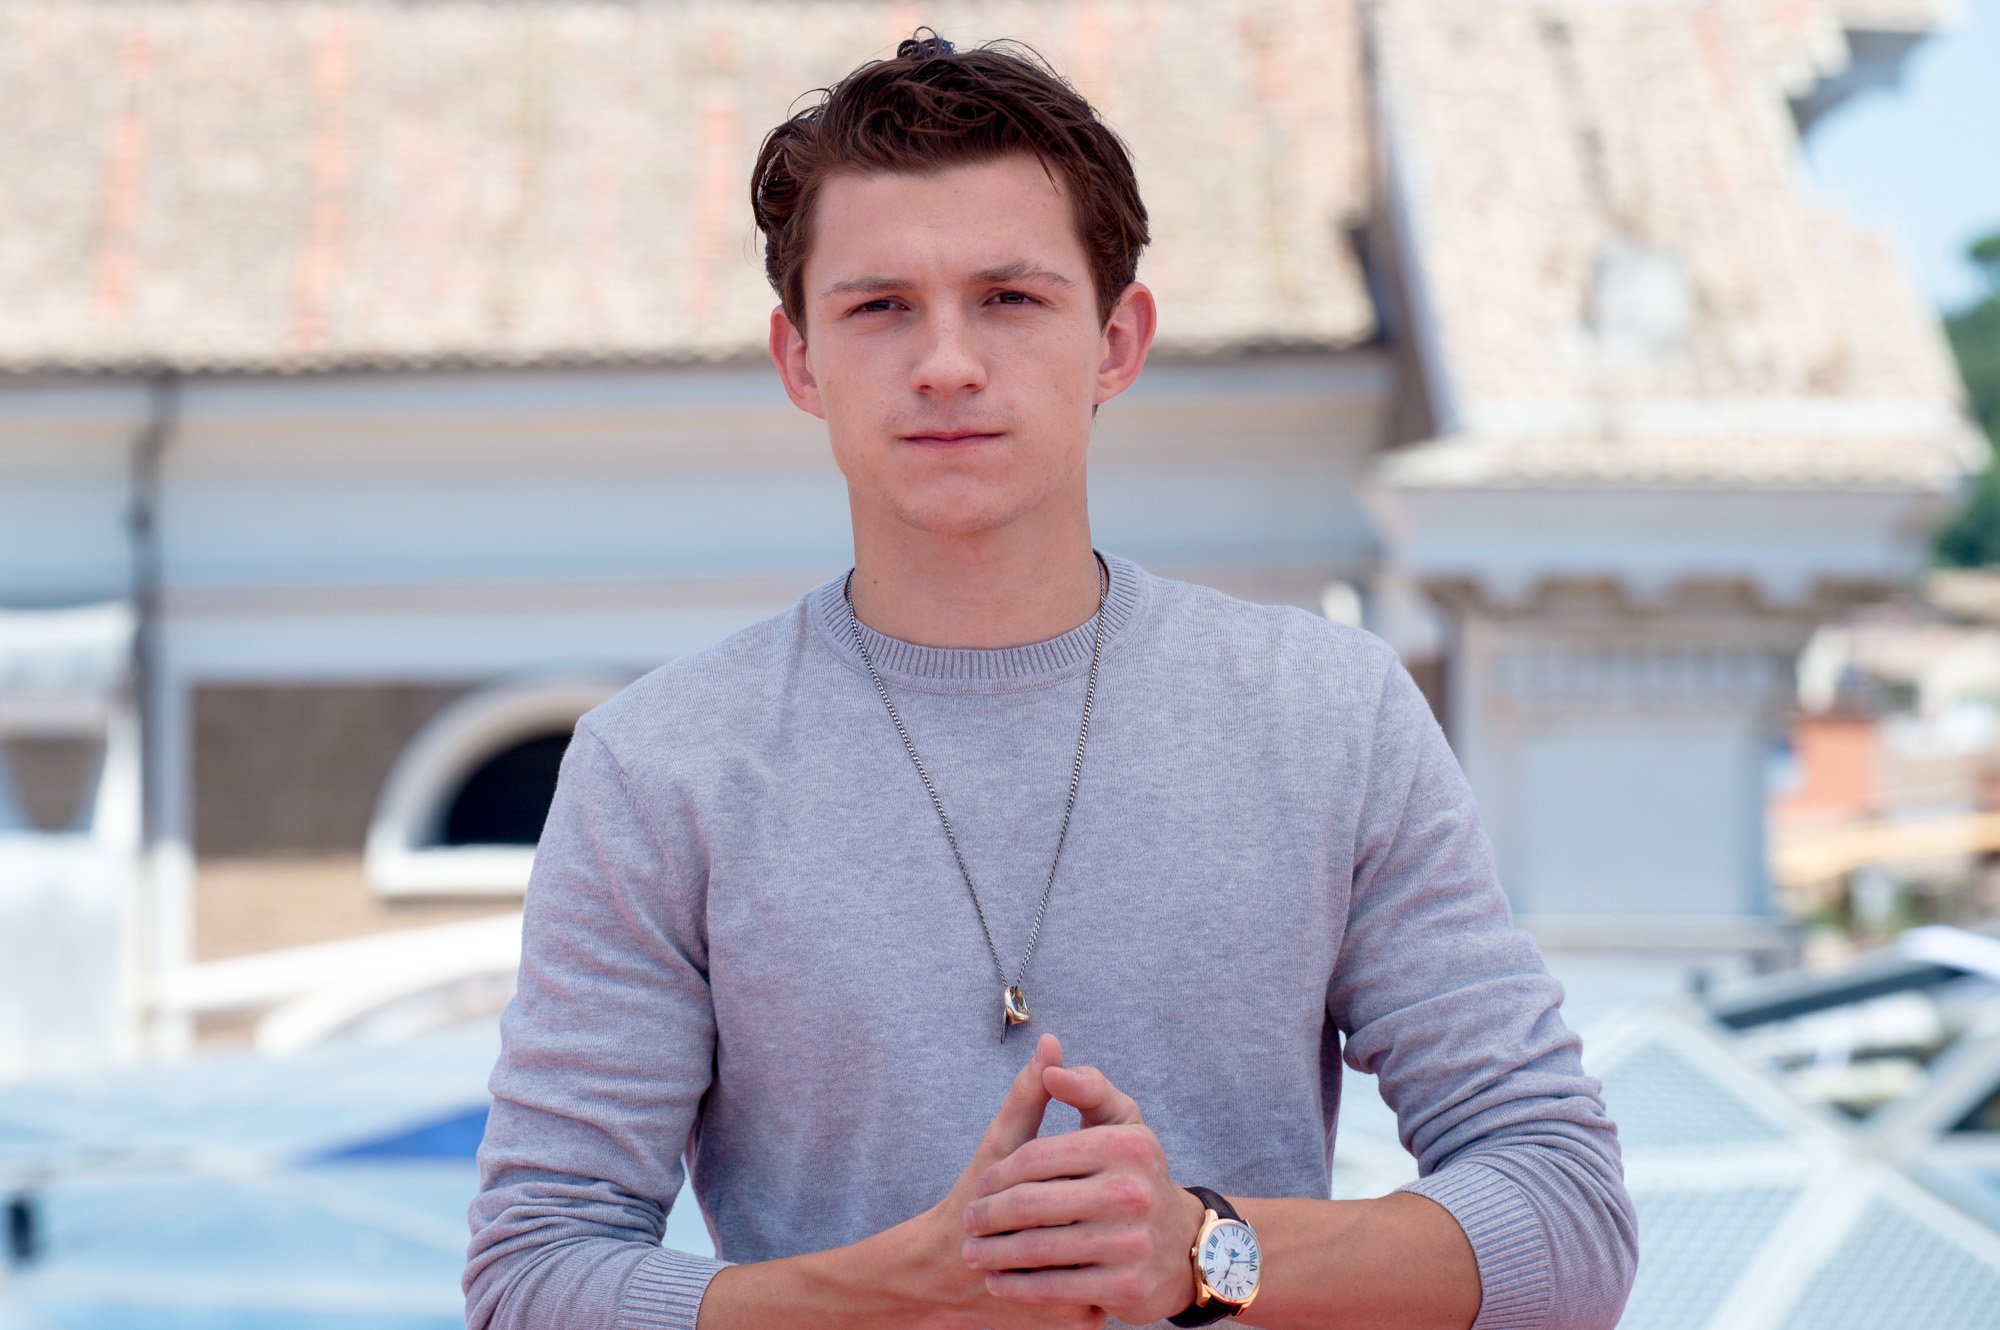 Spider-Man actor Tom Holland wearing a grey, long-sleeved shirt and a watch. He's standing with his hands clasped together.